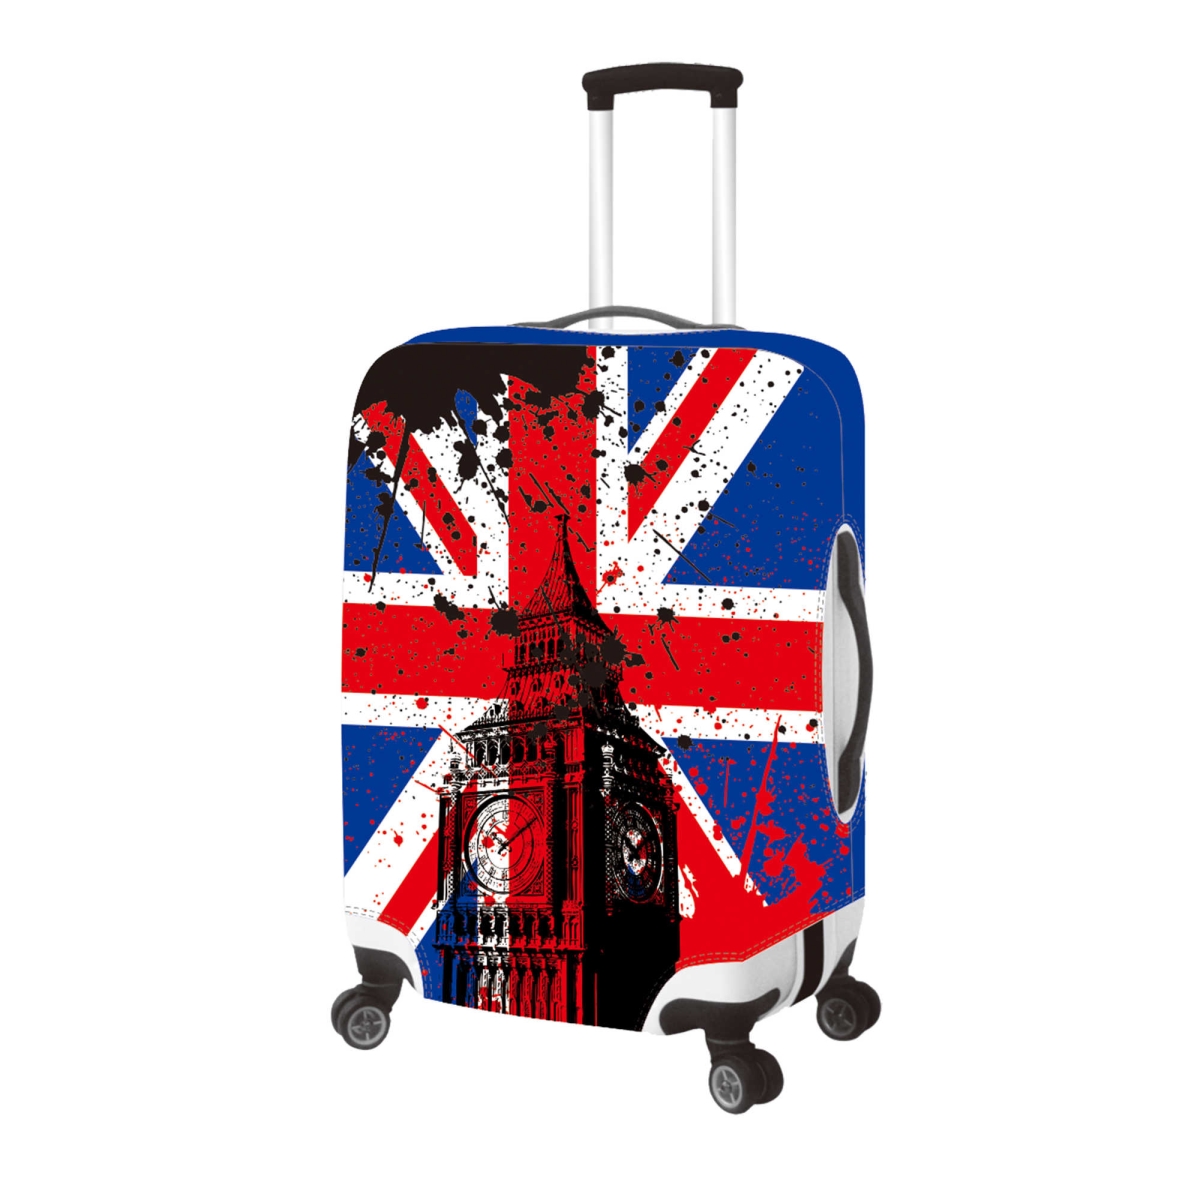 Picture of Picnic Gift 9013-LG Big Ben-Primeware Luggage Cover - Large